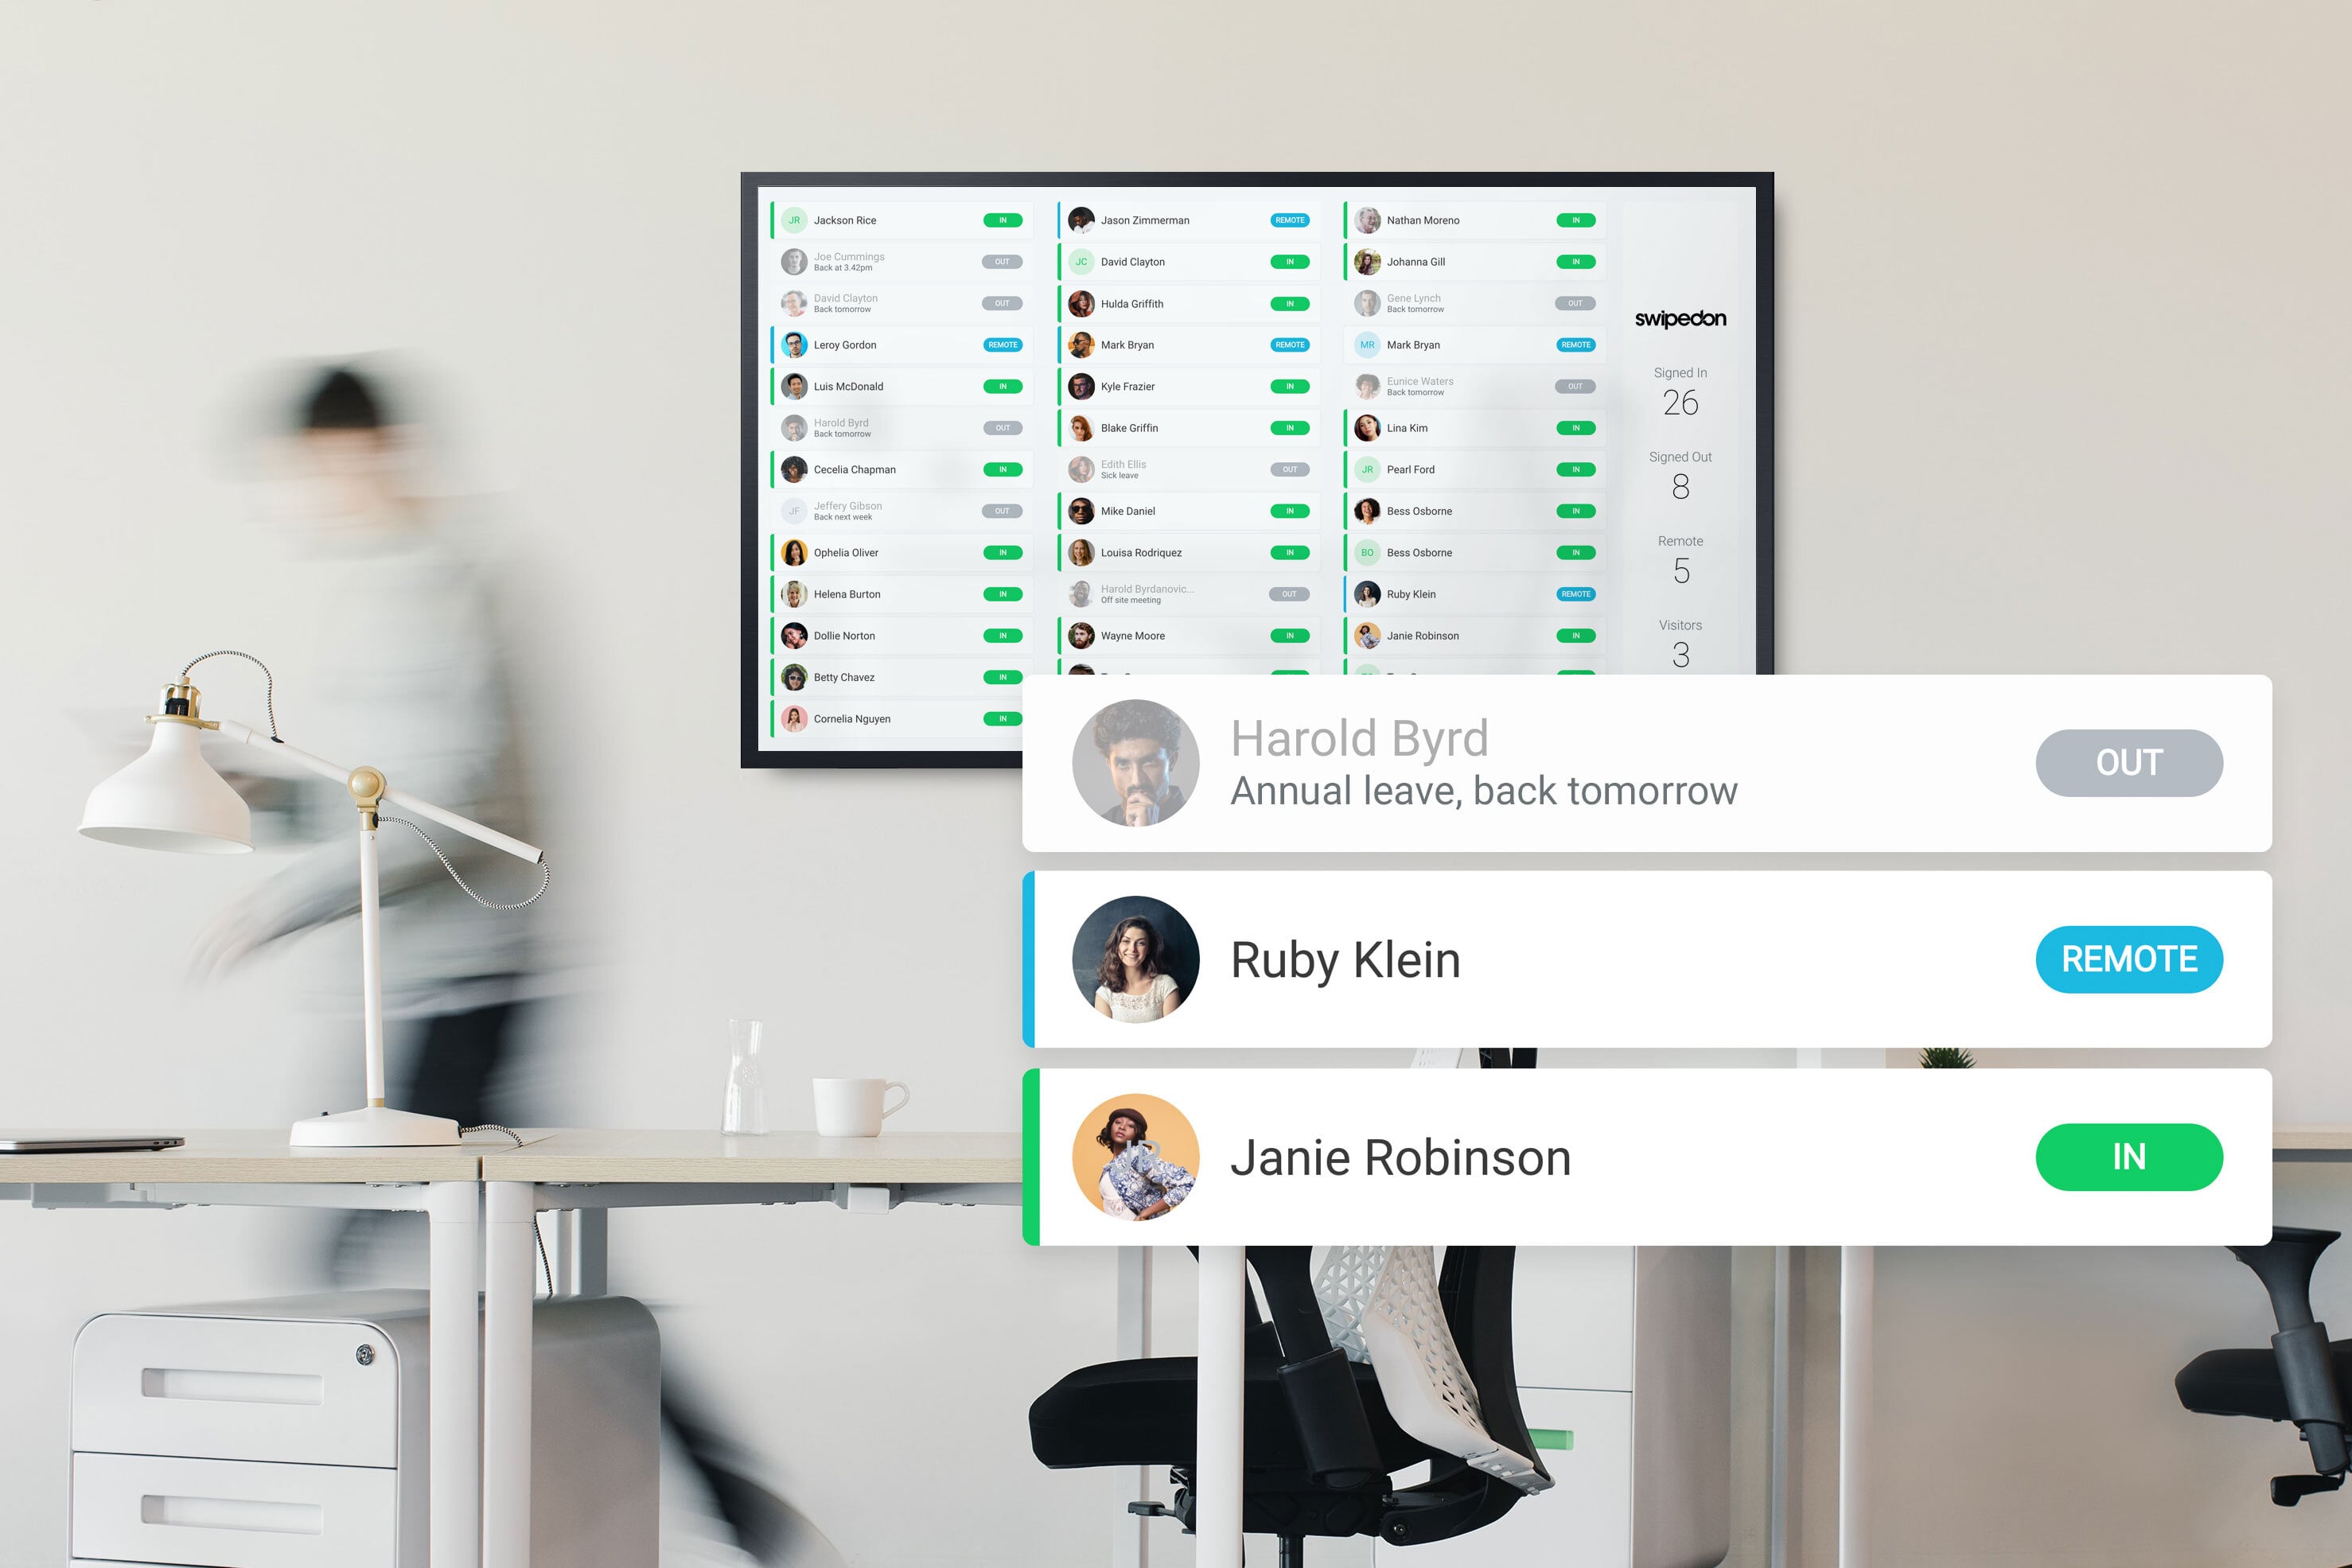 What is an employee status board? Real time log of employee sign in and out shown on a large dashboard.